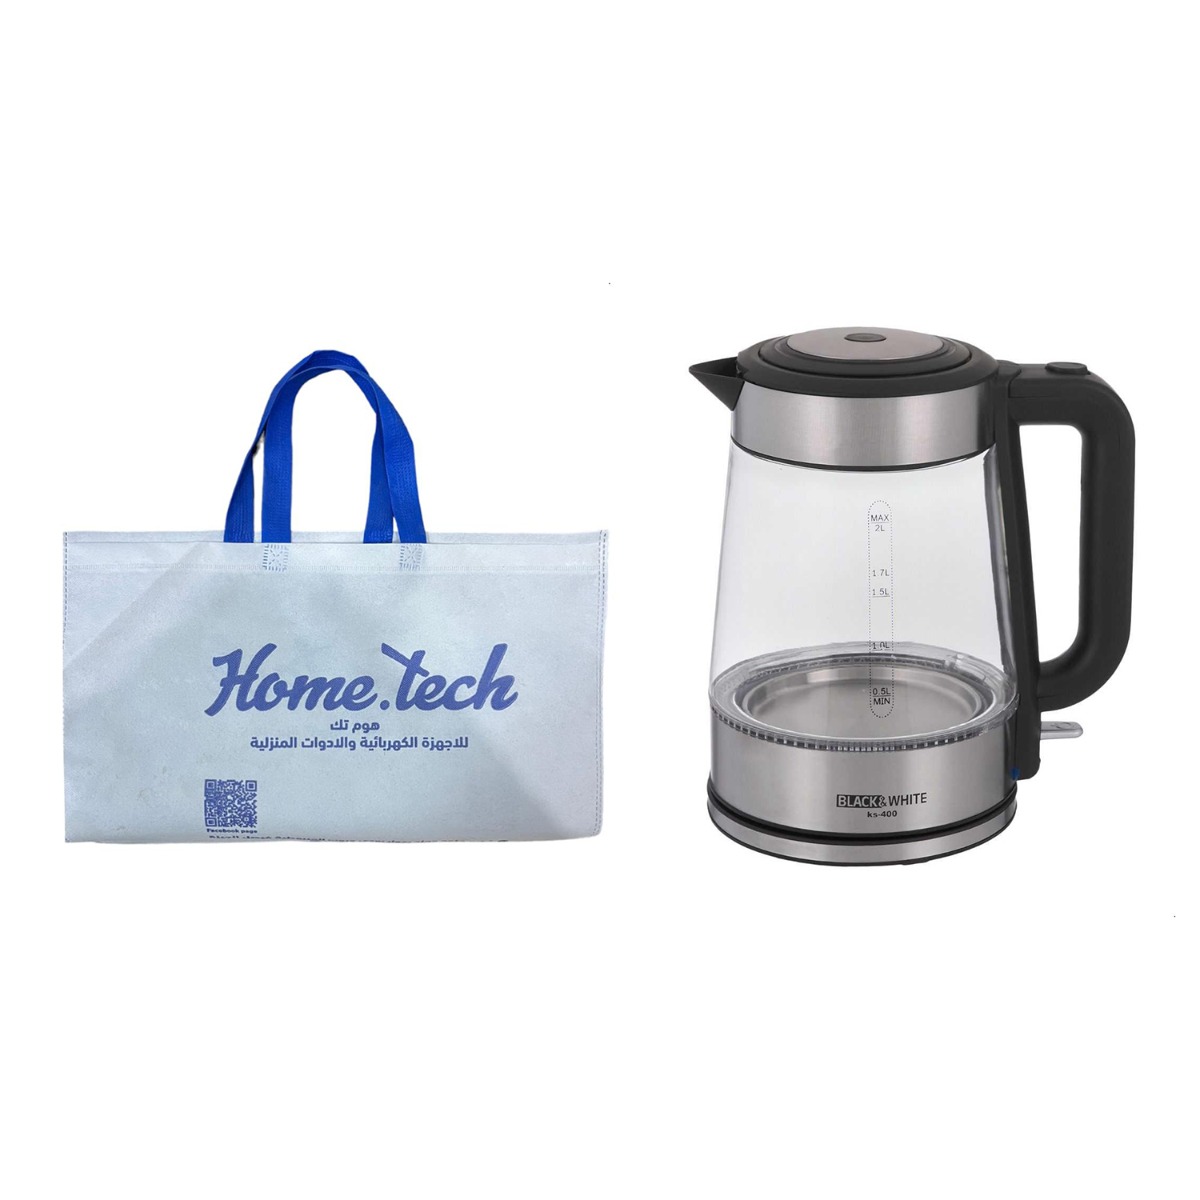 Black And White Electric Kettle, 2 Liters, 2200 Watt, Black and Silver - KS400 with Gift Bag